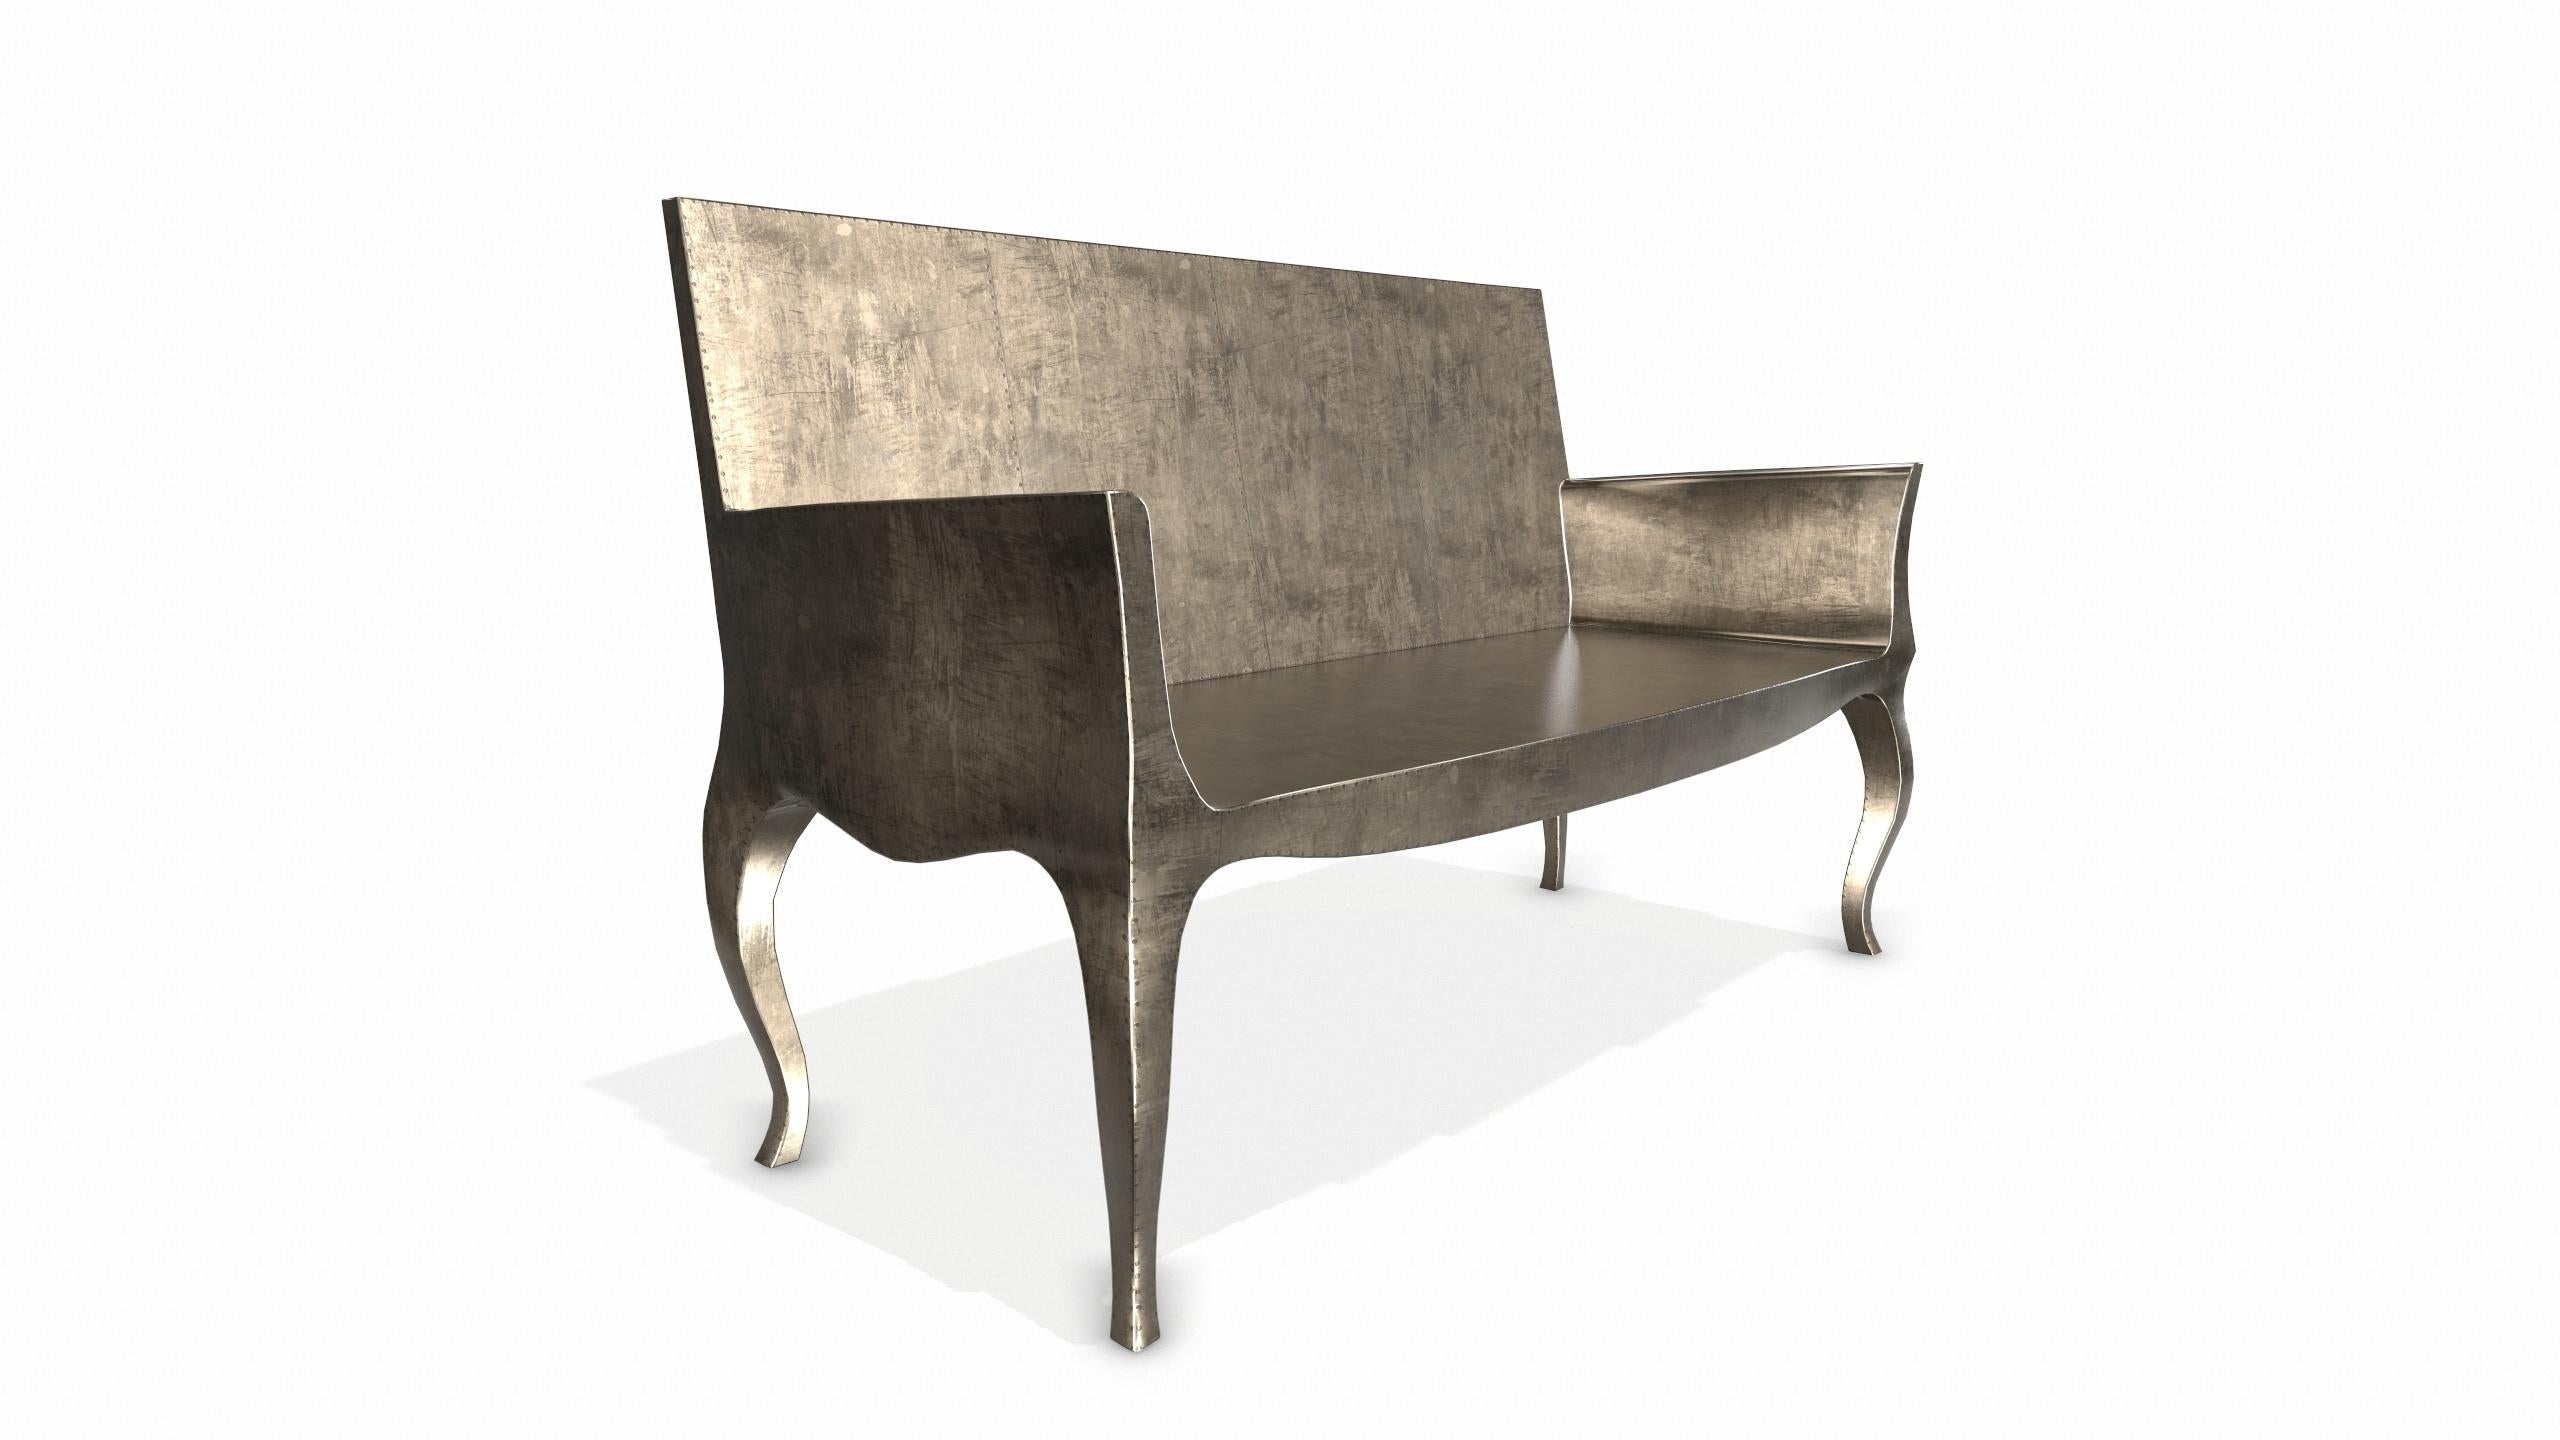 Louise Settee Art Deco Lounge Chairs in Smooth Antique Bronze by Paul Mathieu In New Condition For Sale In New York, NY